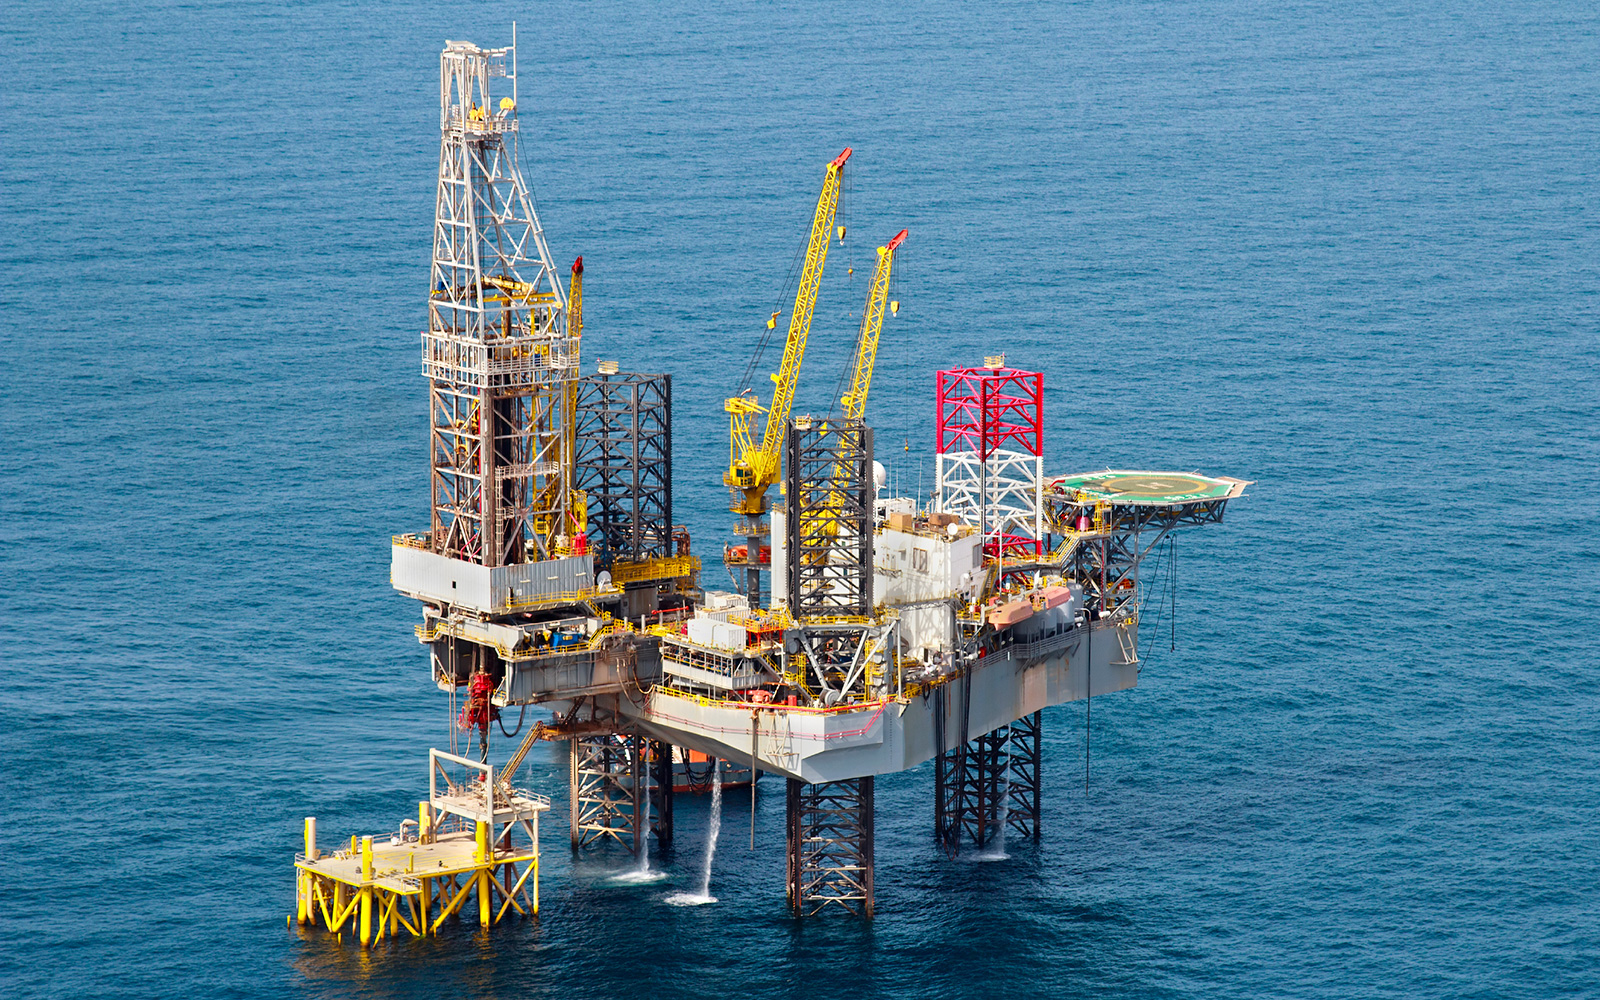 Aerial view of large oil offshore drilling platform surrounded by ocean